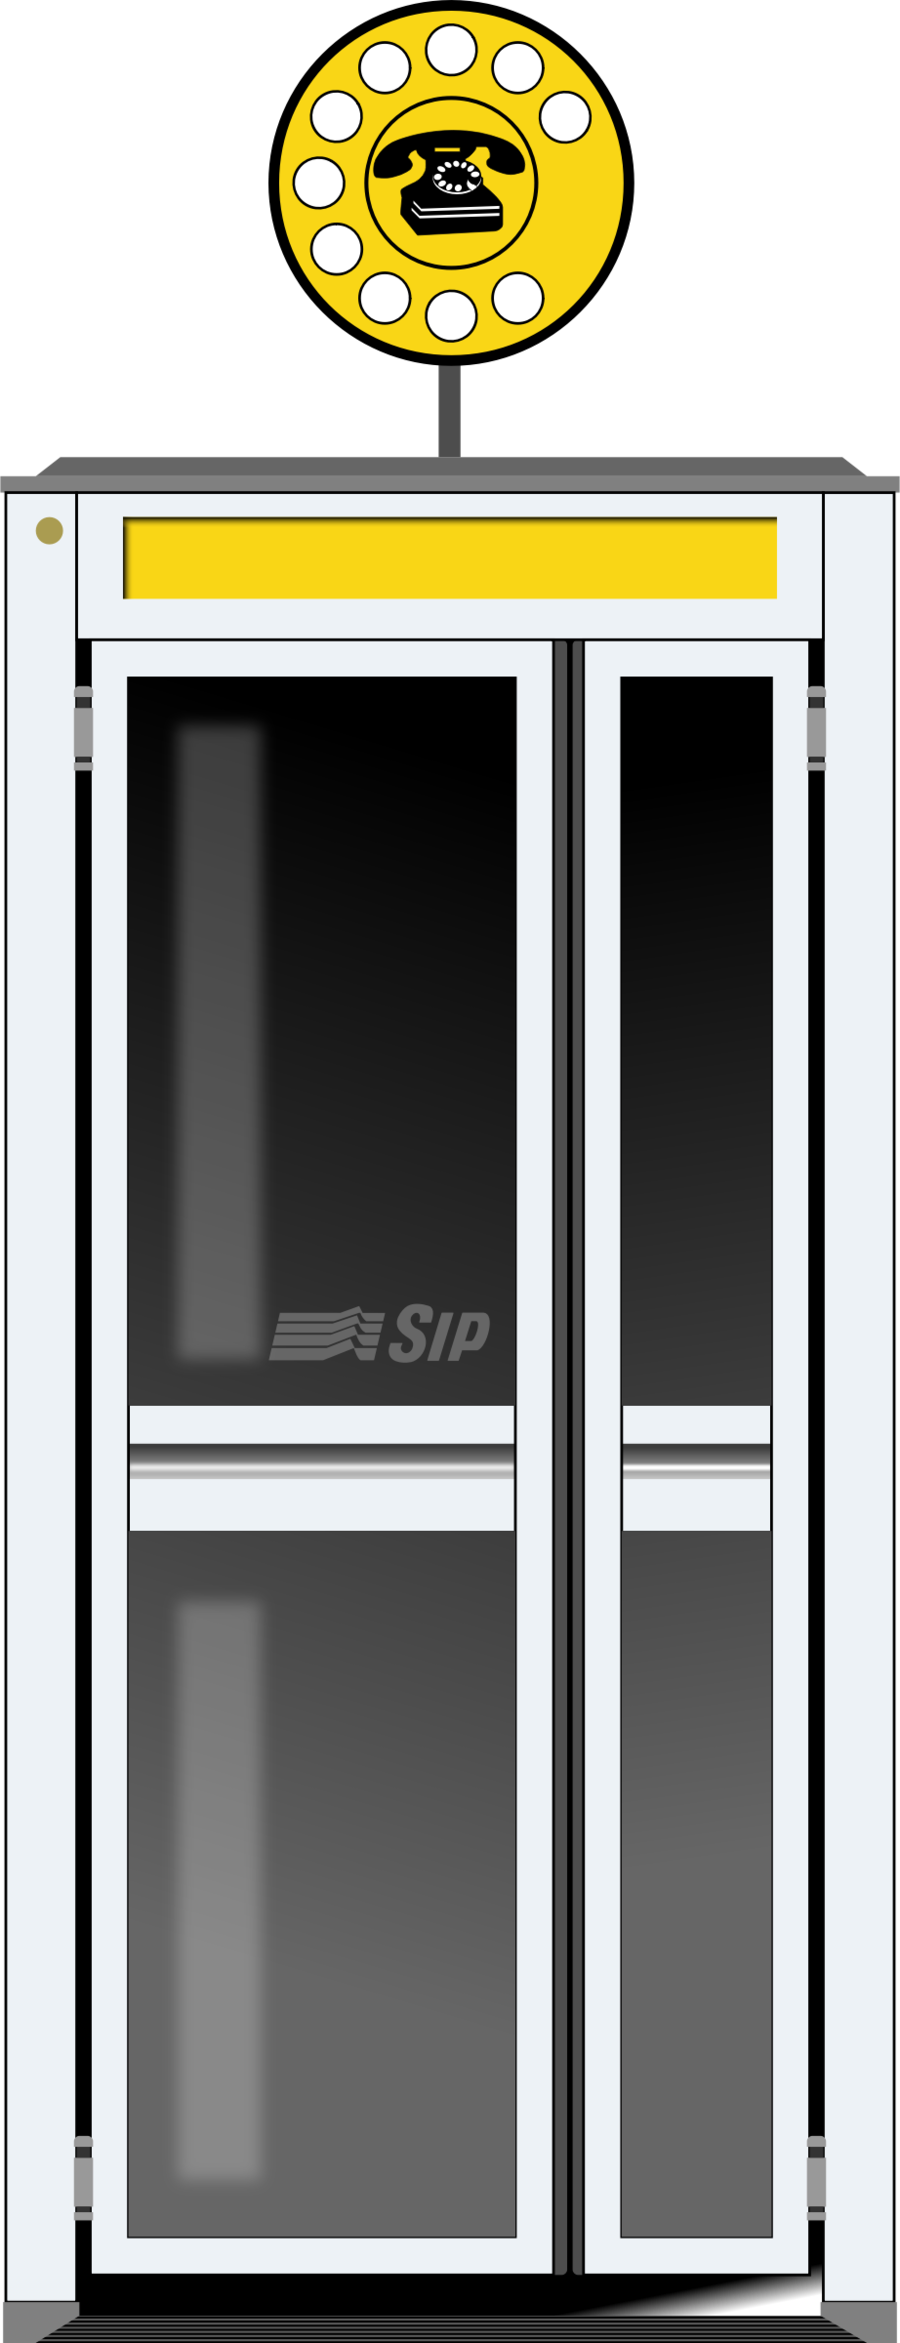 American Phone Booth Vector Clipart Telephone Booth - American Phone Booth Vector Clipart Telephone Booth (900x2343)